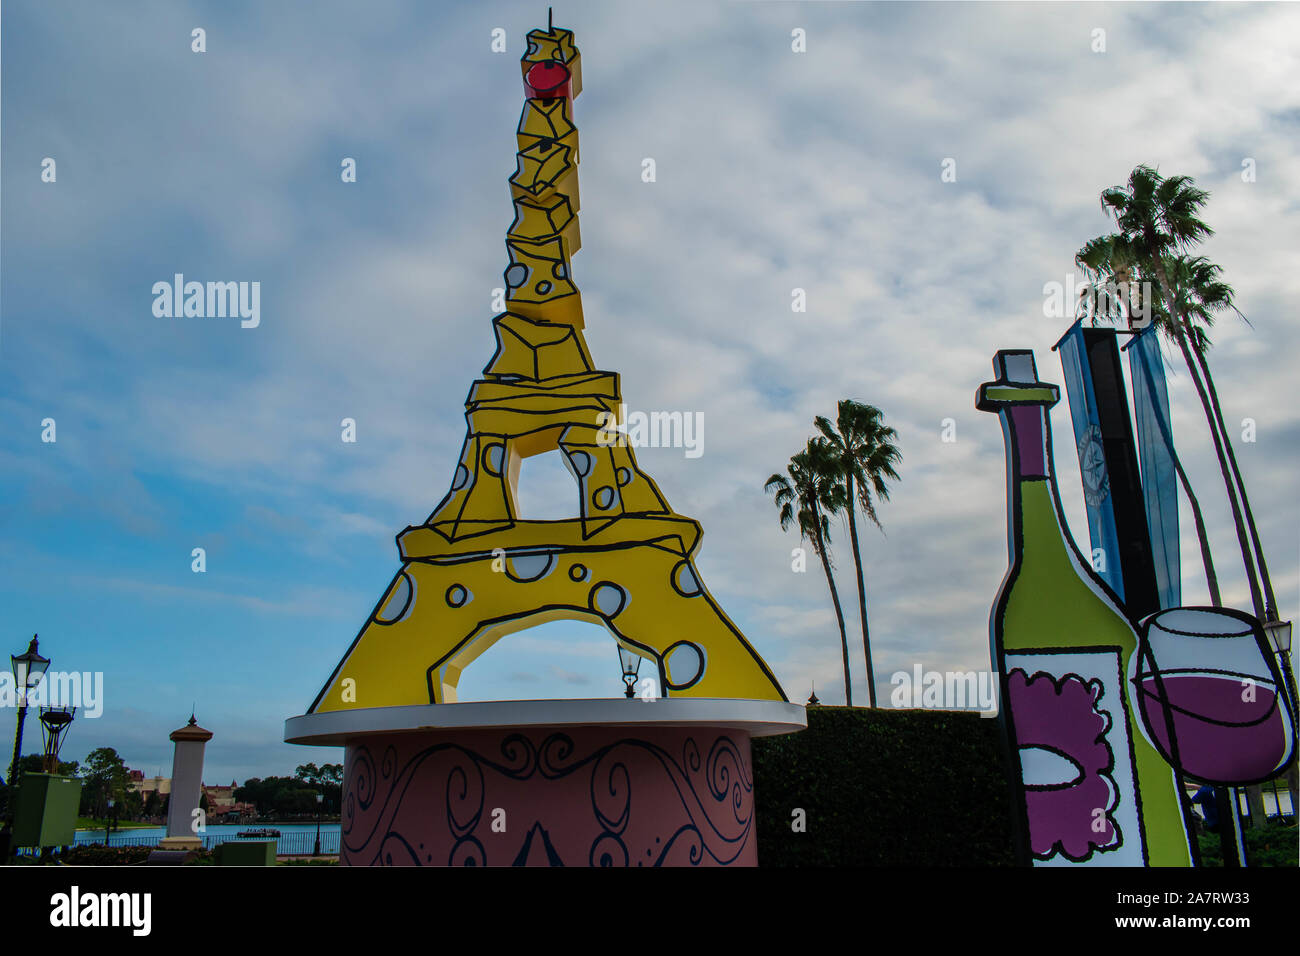 Orlando, Florida. November 01, 2019. Top view of yellow Eiffel Tower in International Food & Wine Festival at Epcot . Stock Photo